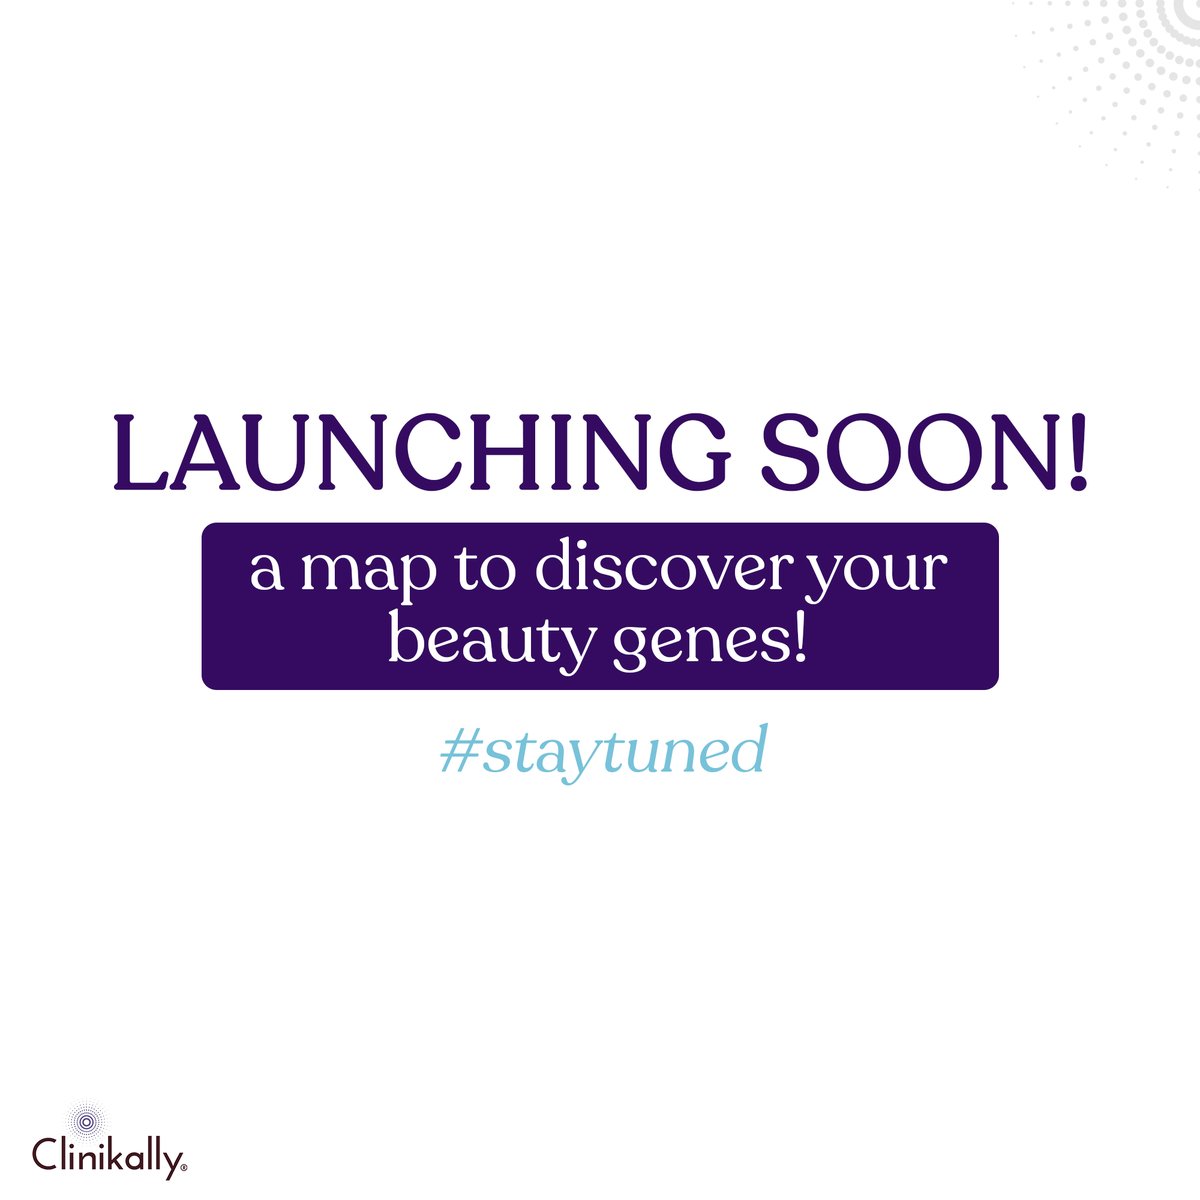 📣 REVEALING SOON 📣India’s 1st!

Breaking the one-size-fits-all approach with a skincare/haircare plan so personalised, it is based on your genetic sequence! 🧬
#launchingsoon #revealingsoon #dnatesting #dnatestresults #clinikally #skincare #Genetics